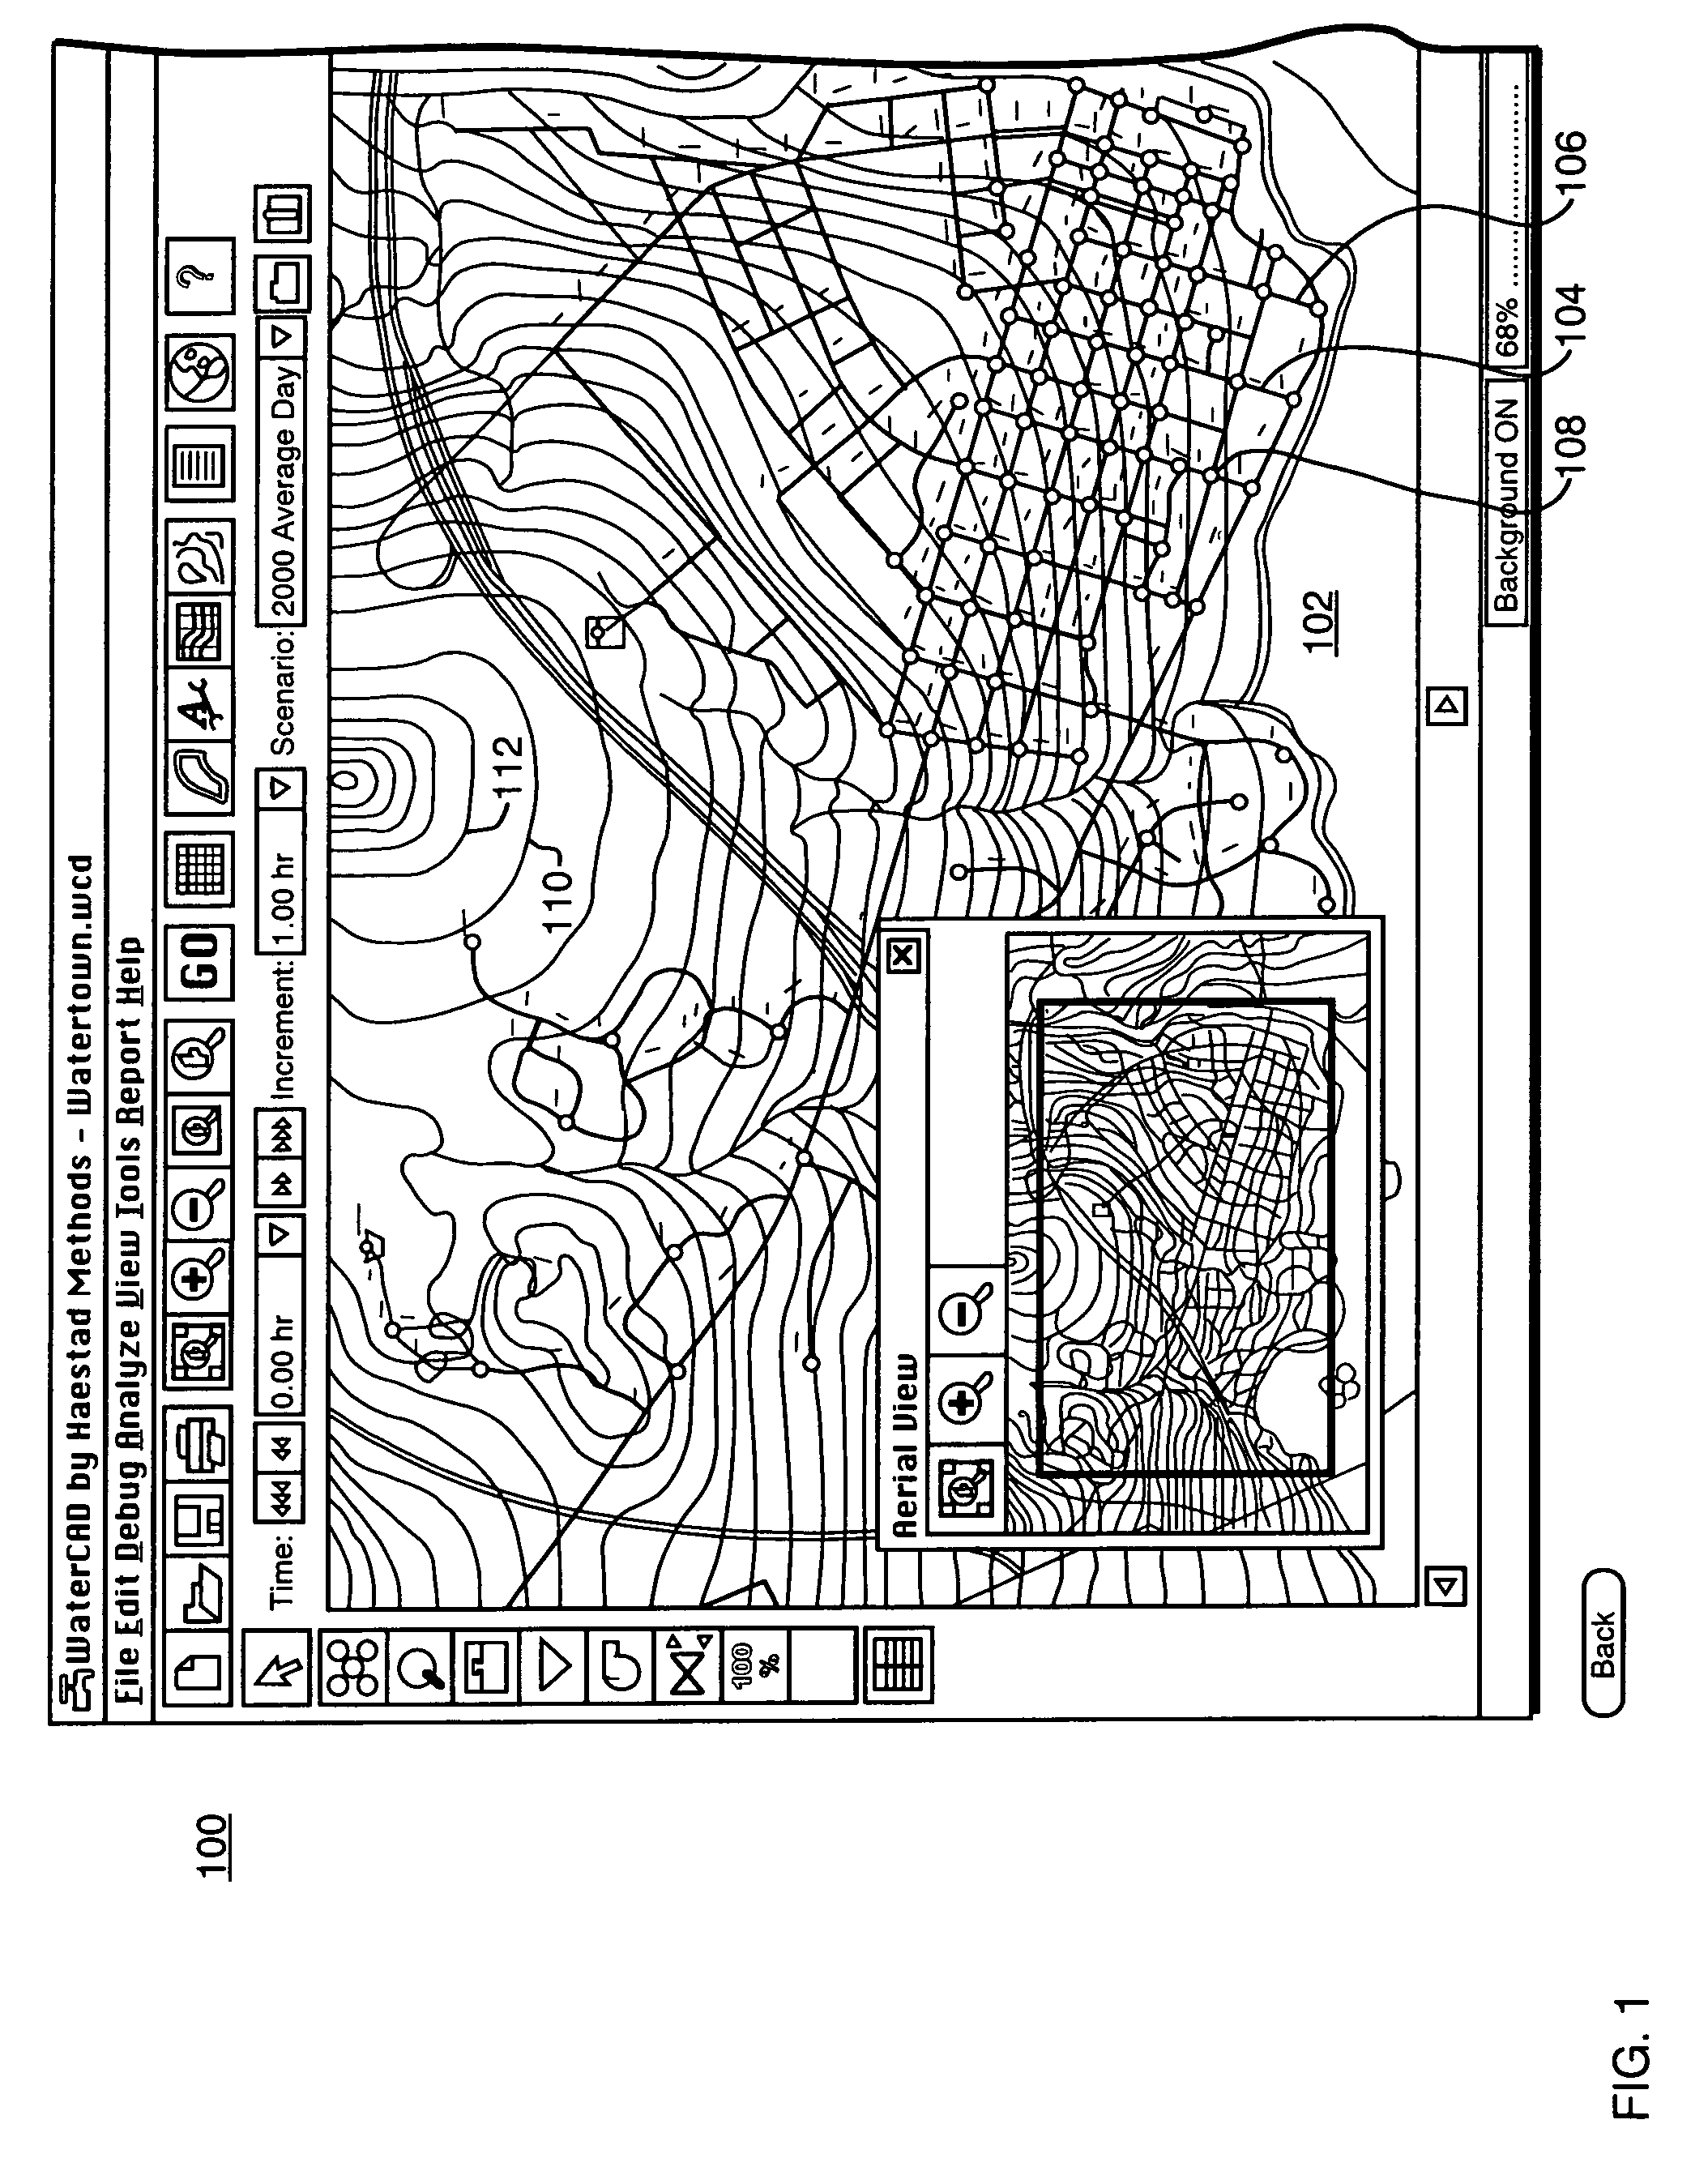 Method for optimizing design and rehabilitation of water distribution systems